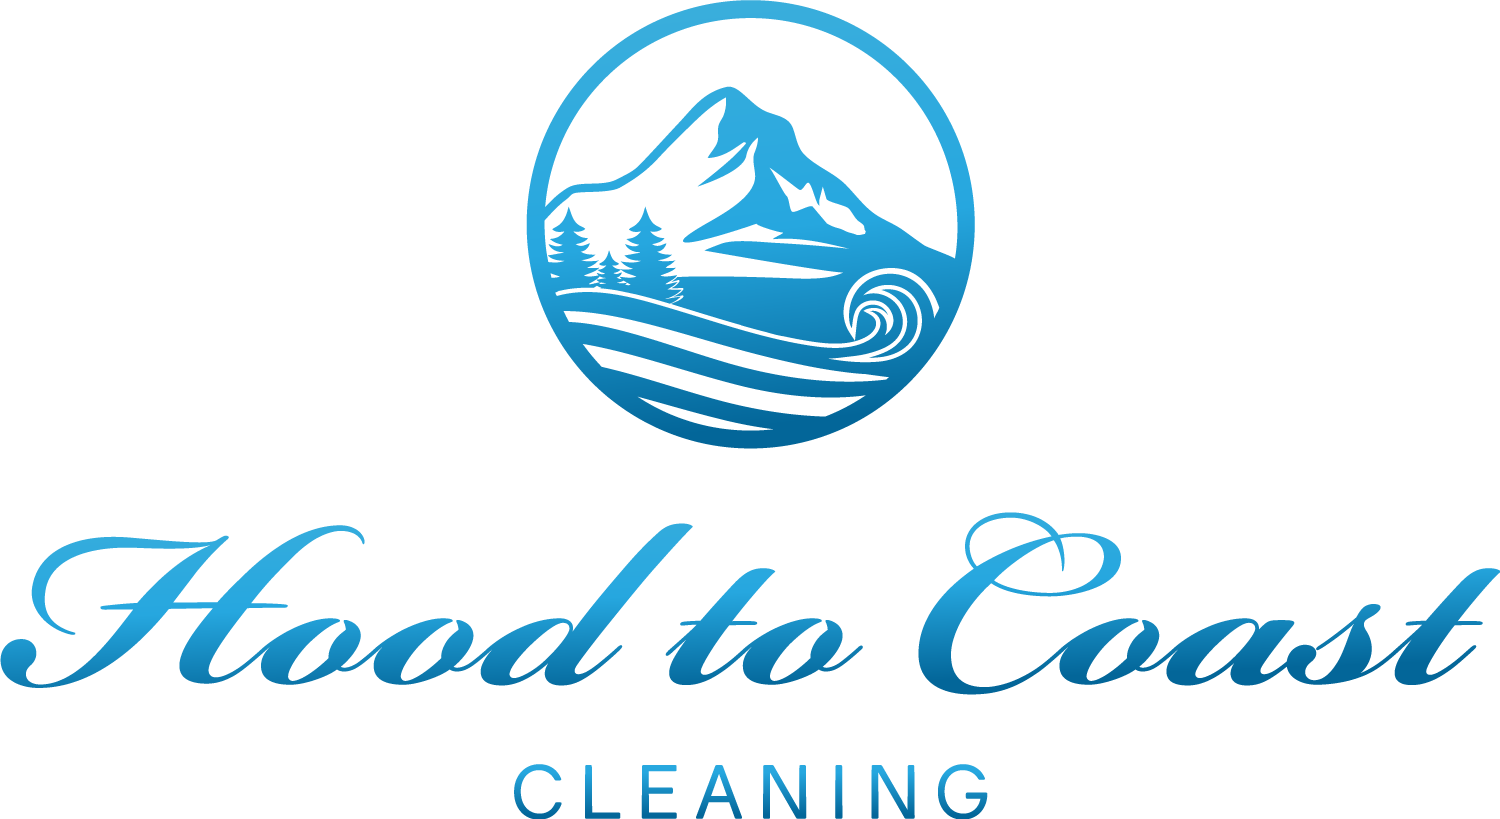 Hood to Coast Cleaning